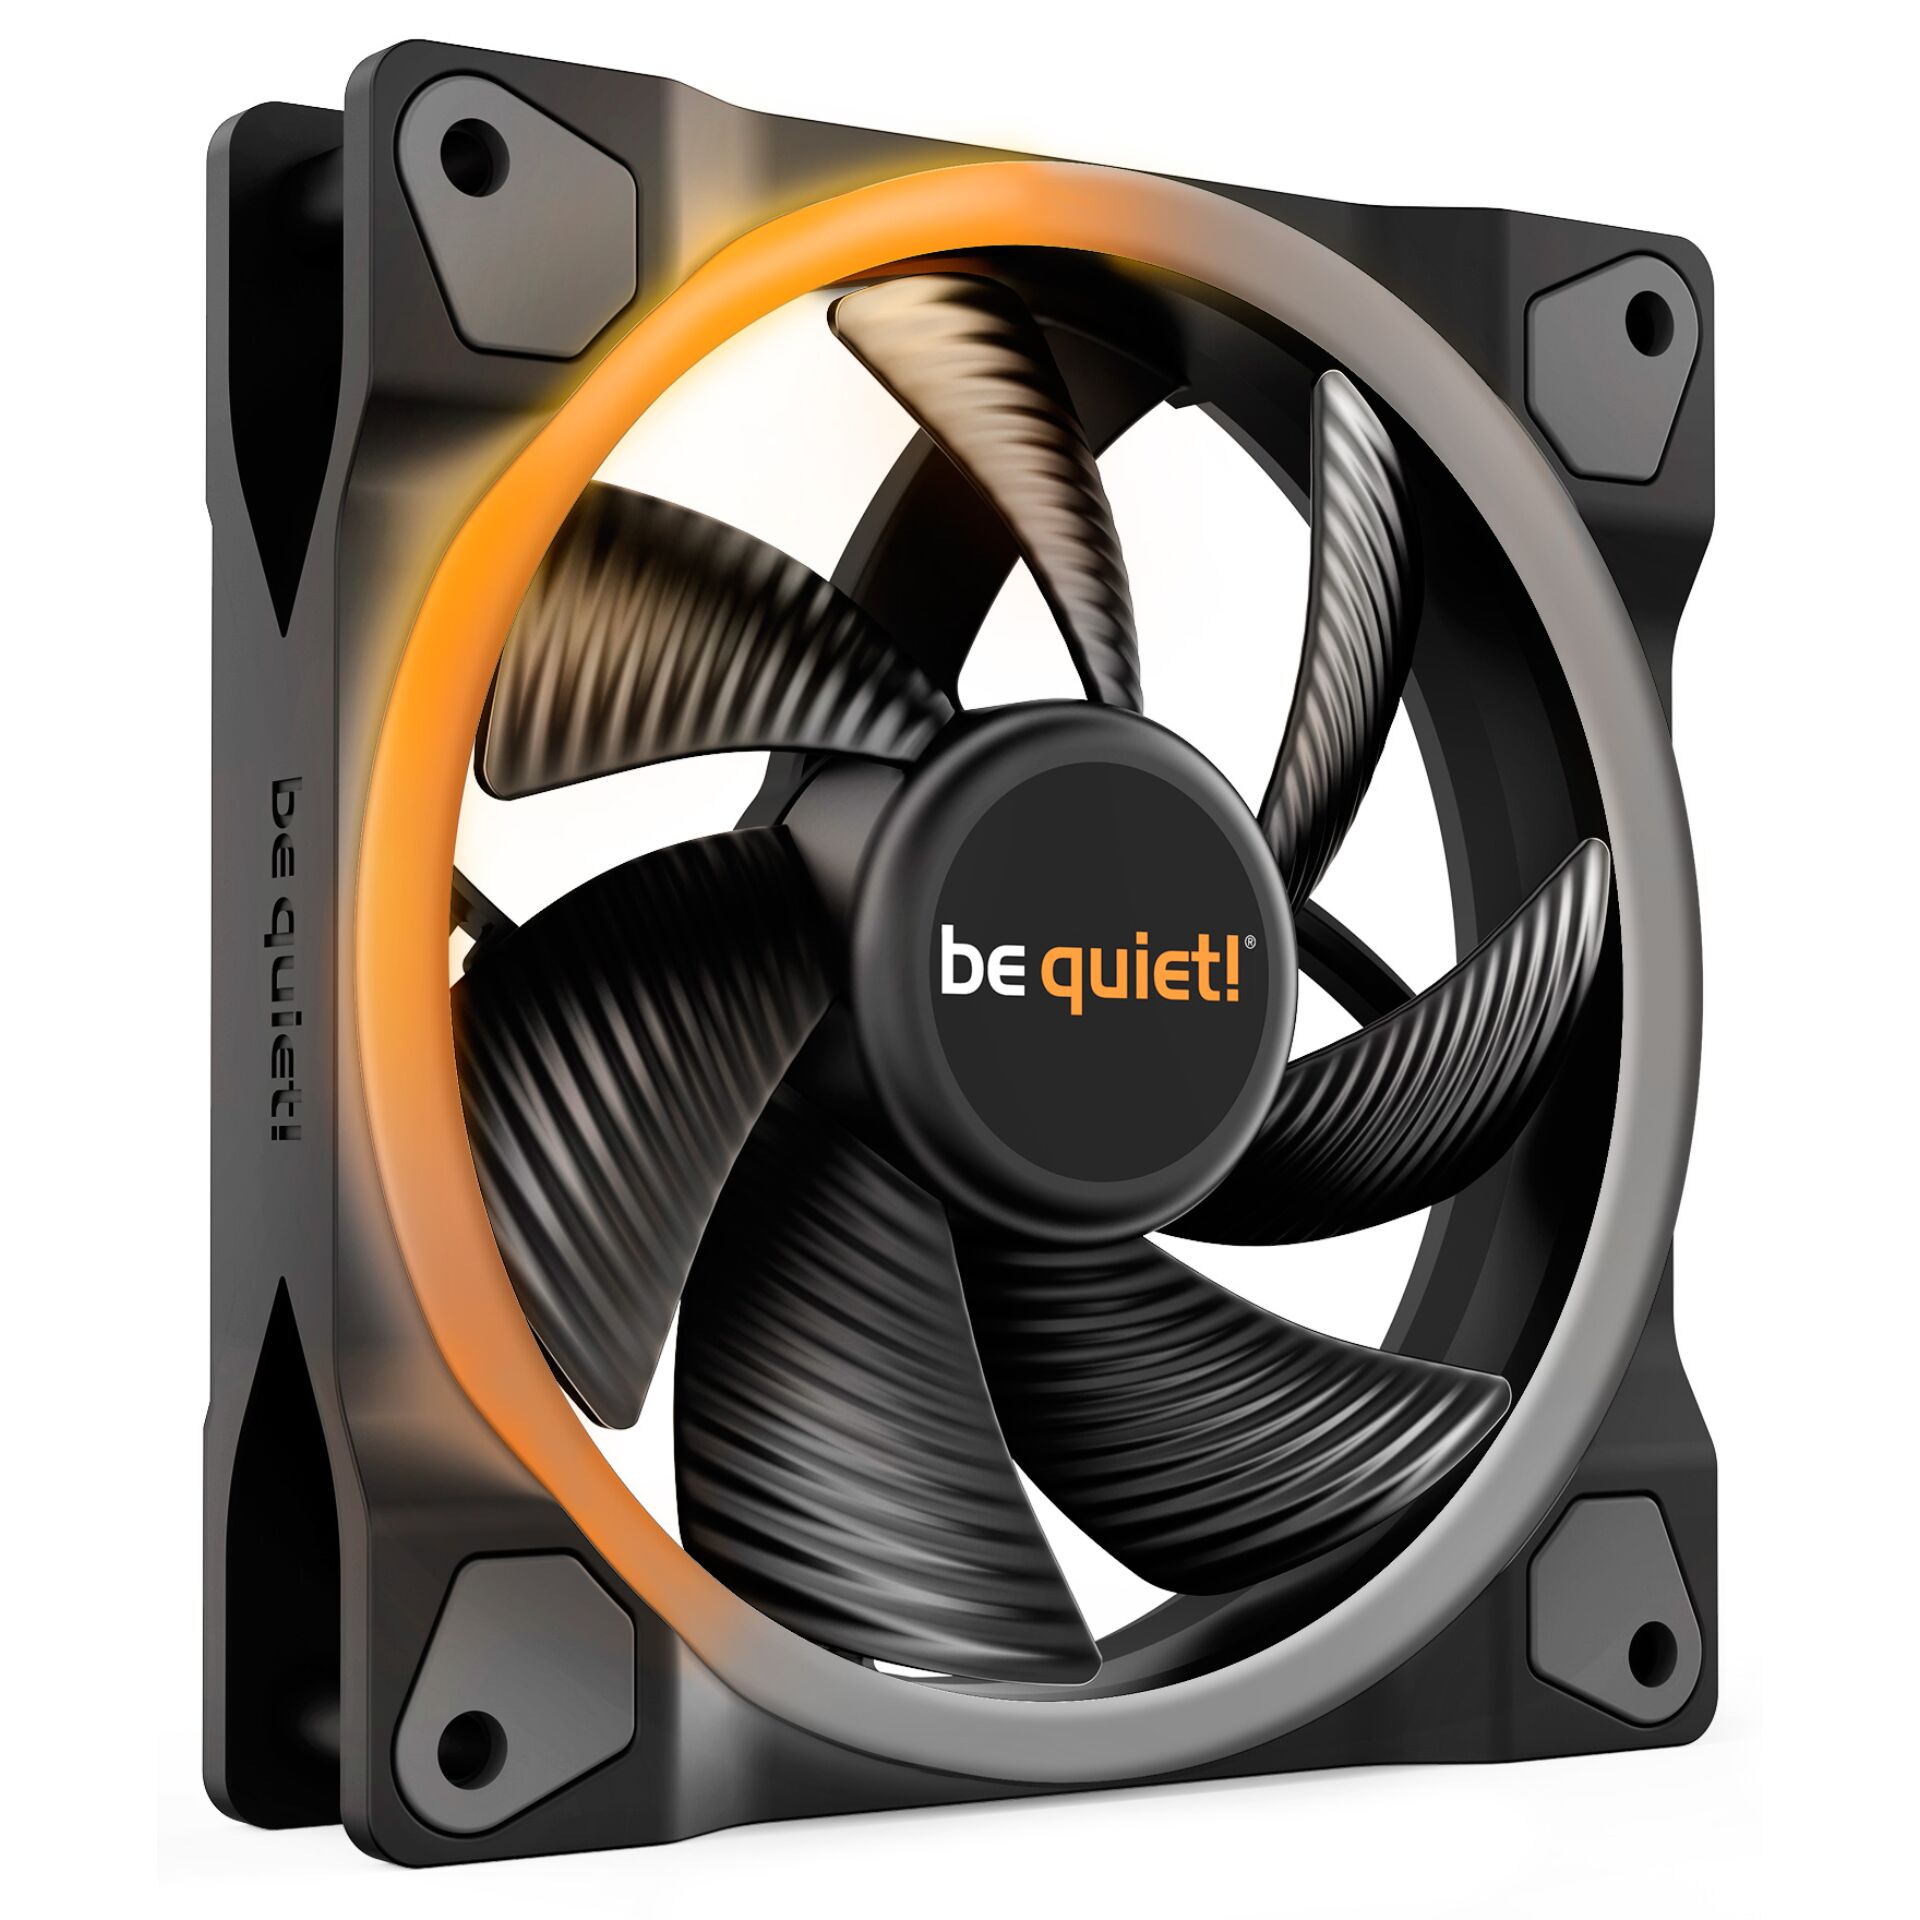 be quiet! Light Wings 120mm PWM